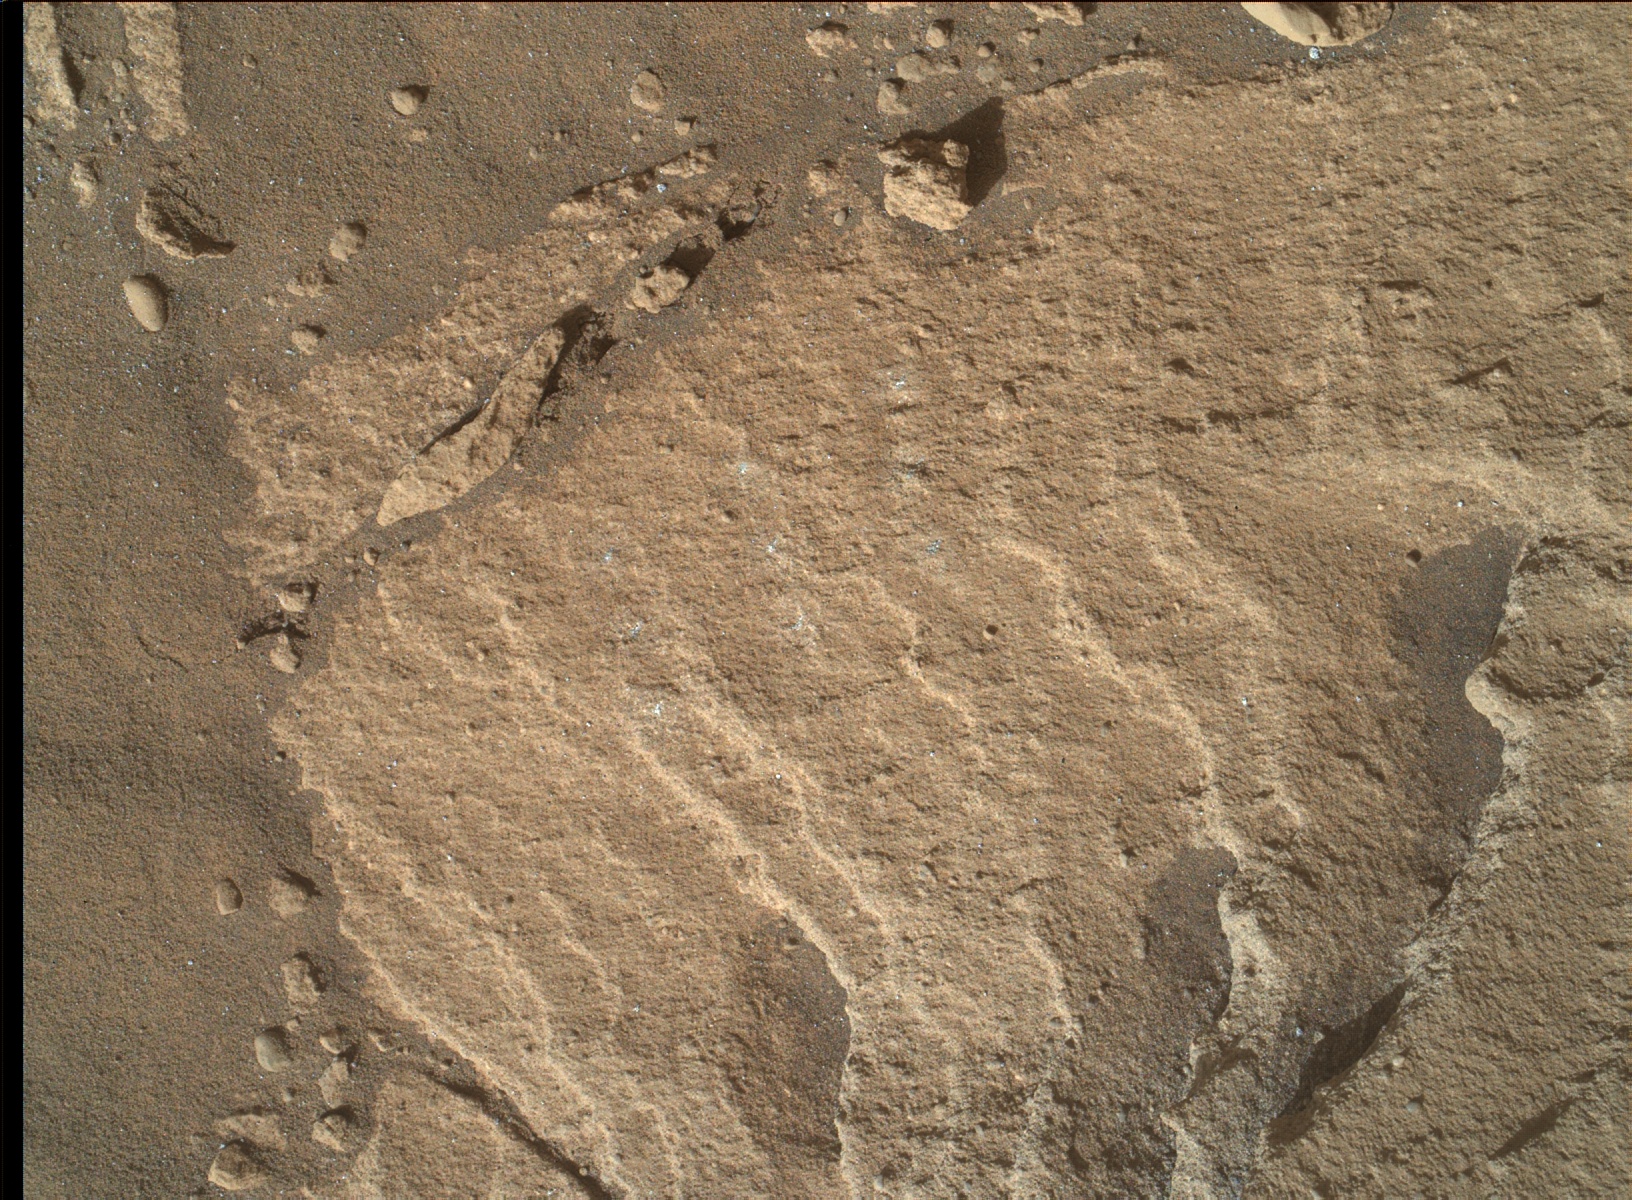 Nasa's Mars rover Curiosity acquired this image using its Mars Hand Lens Imager (MAHLI) on Sol 1143